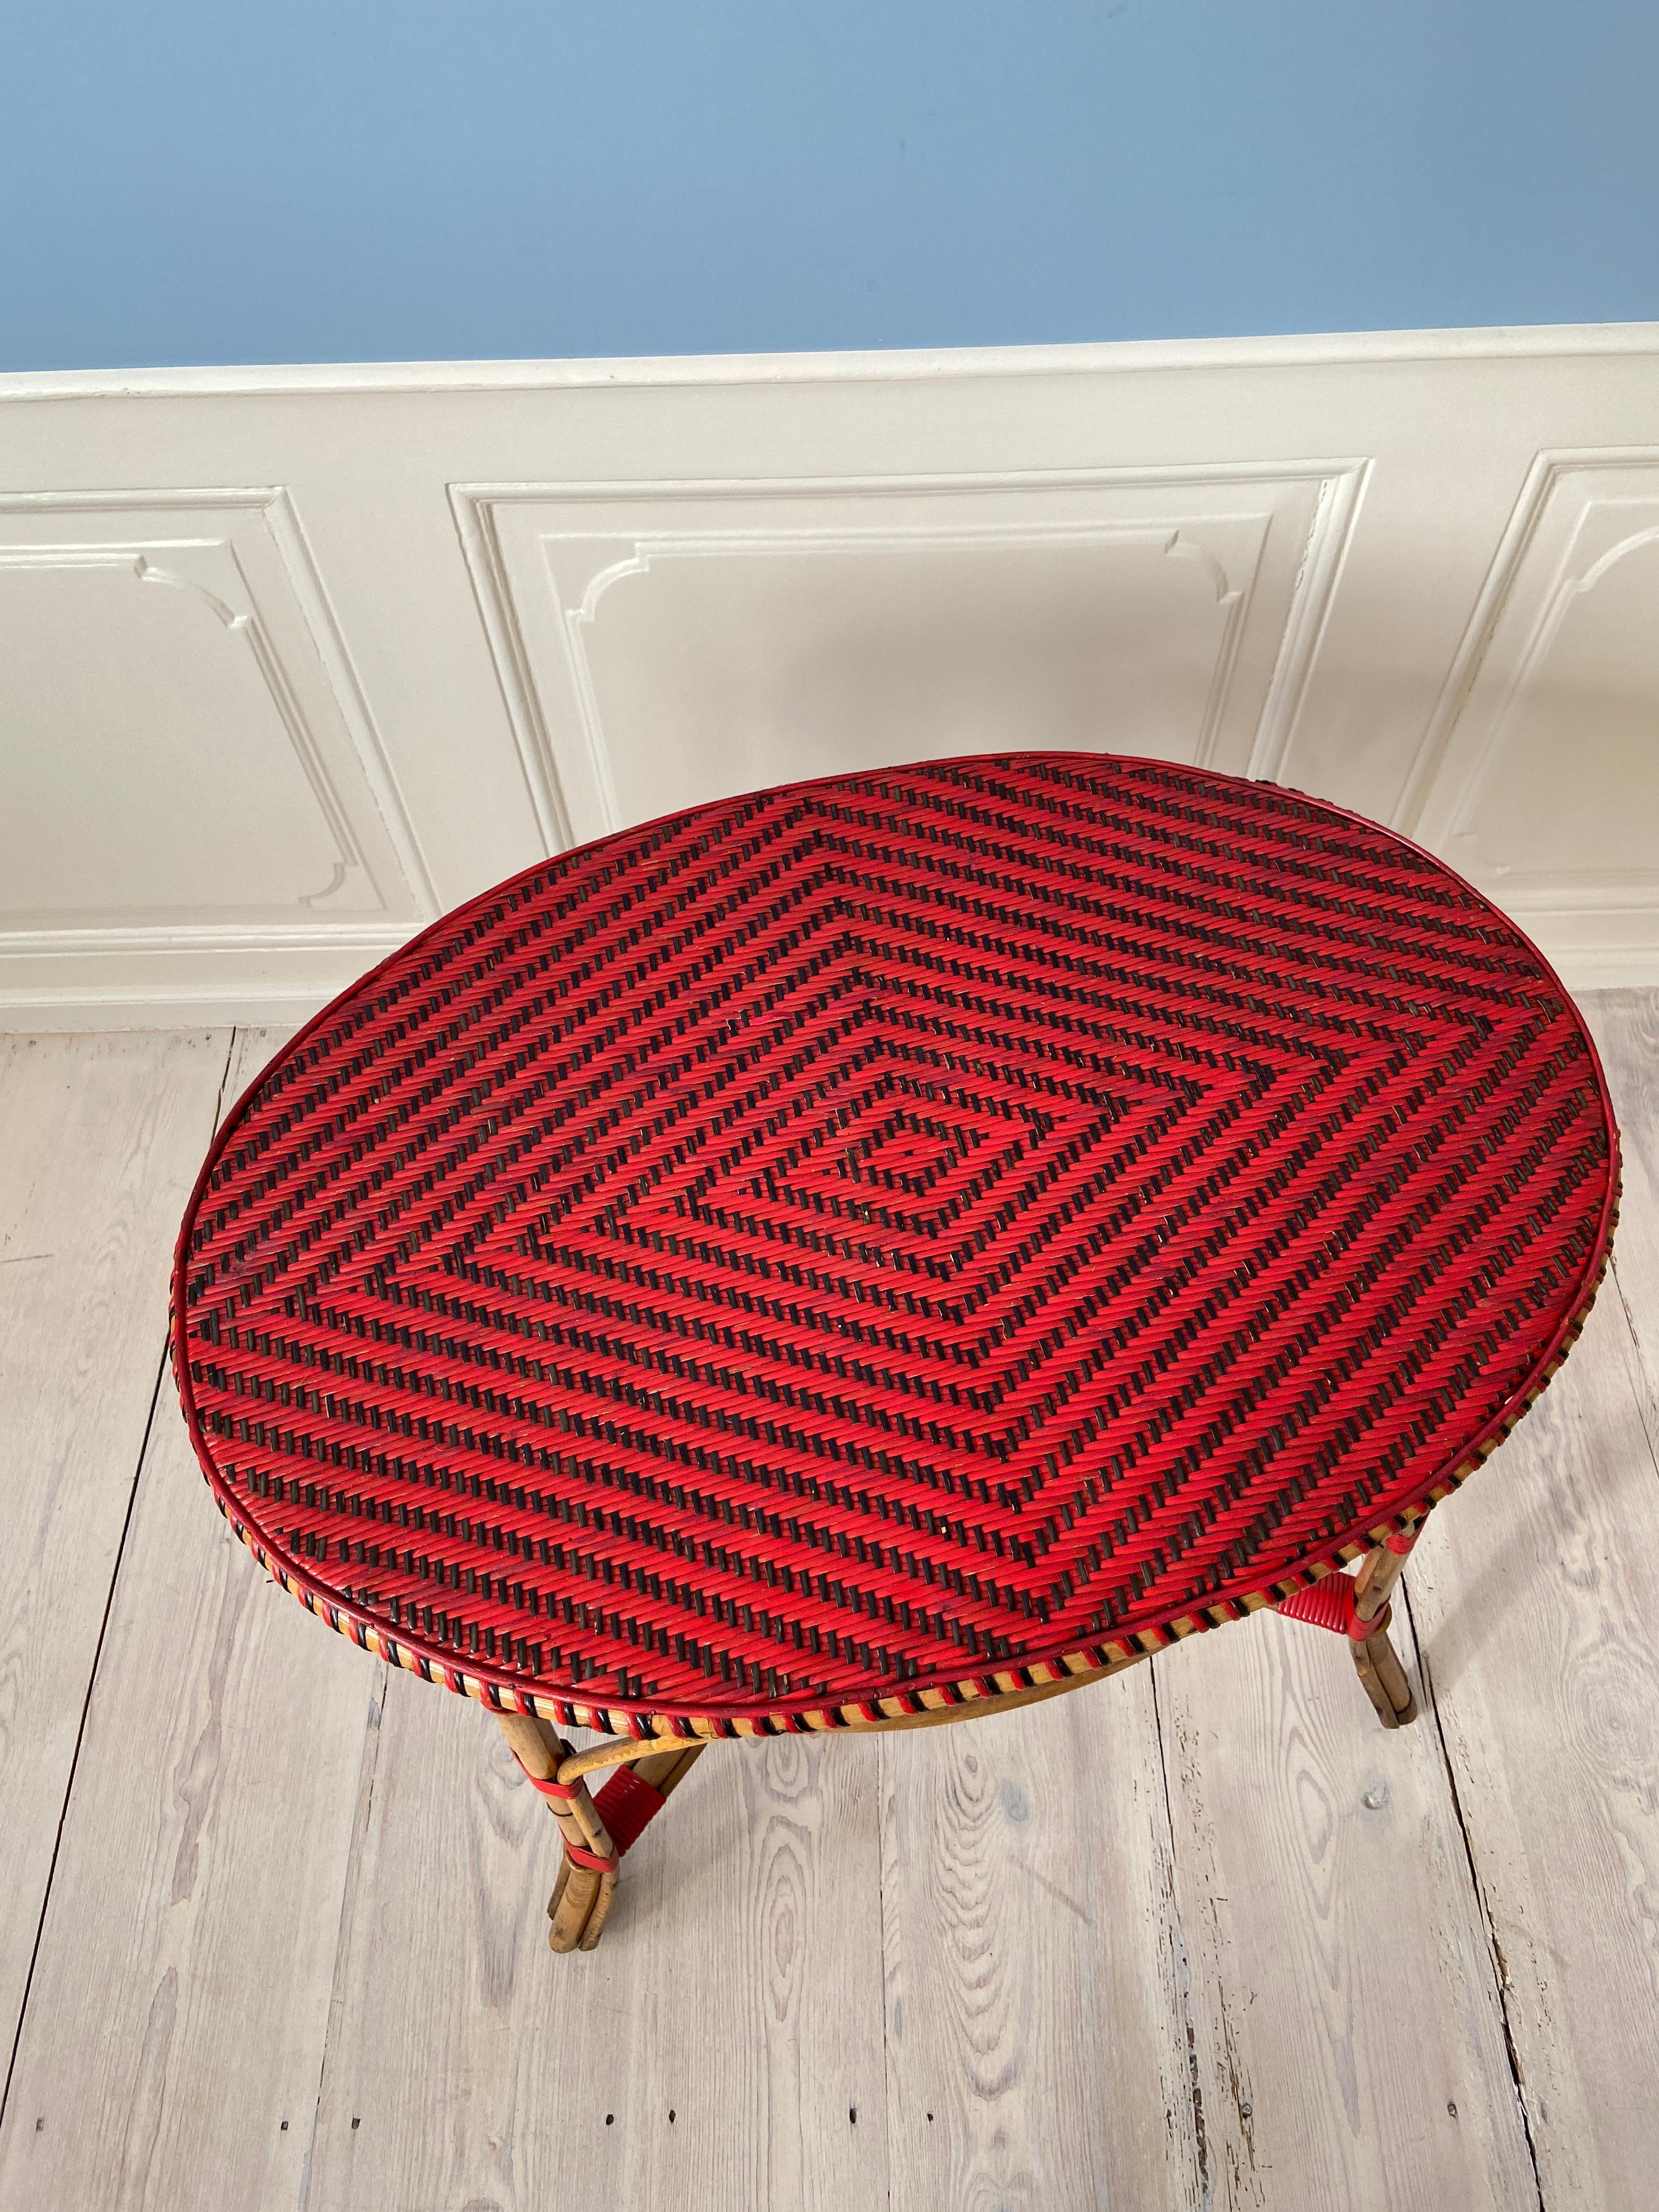 Vintage Rattan Table with Elegant Red Woven Details, France, Early 20th-Century 1